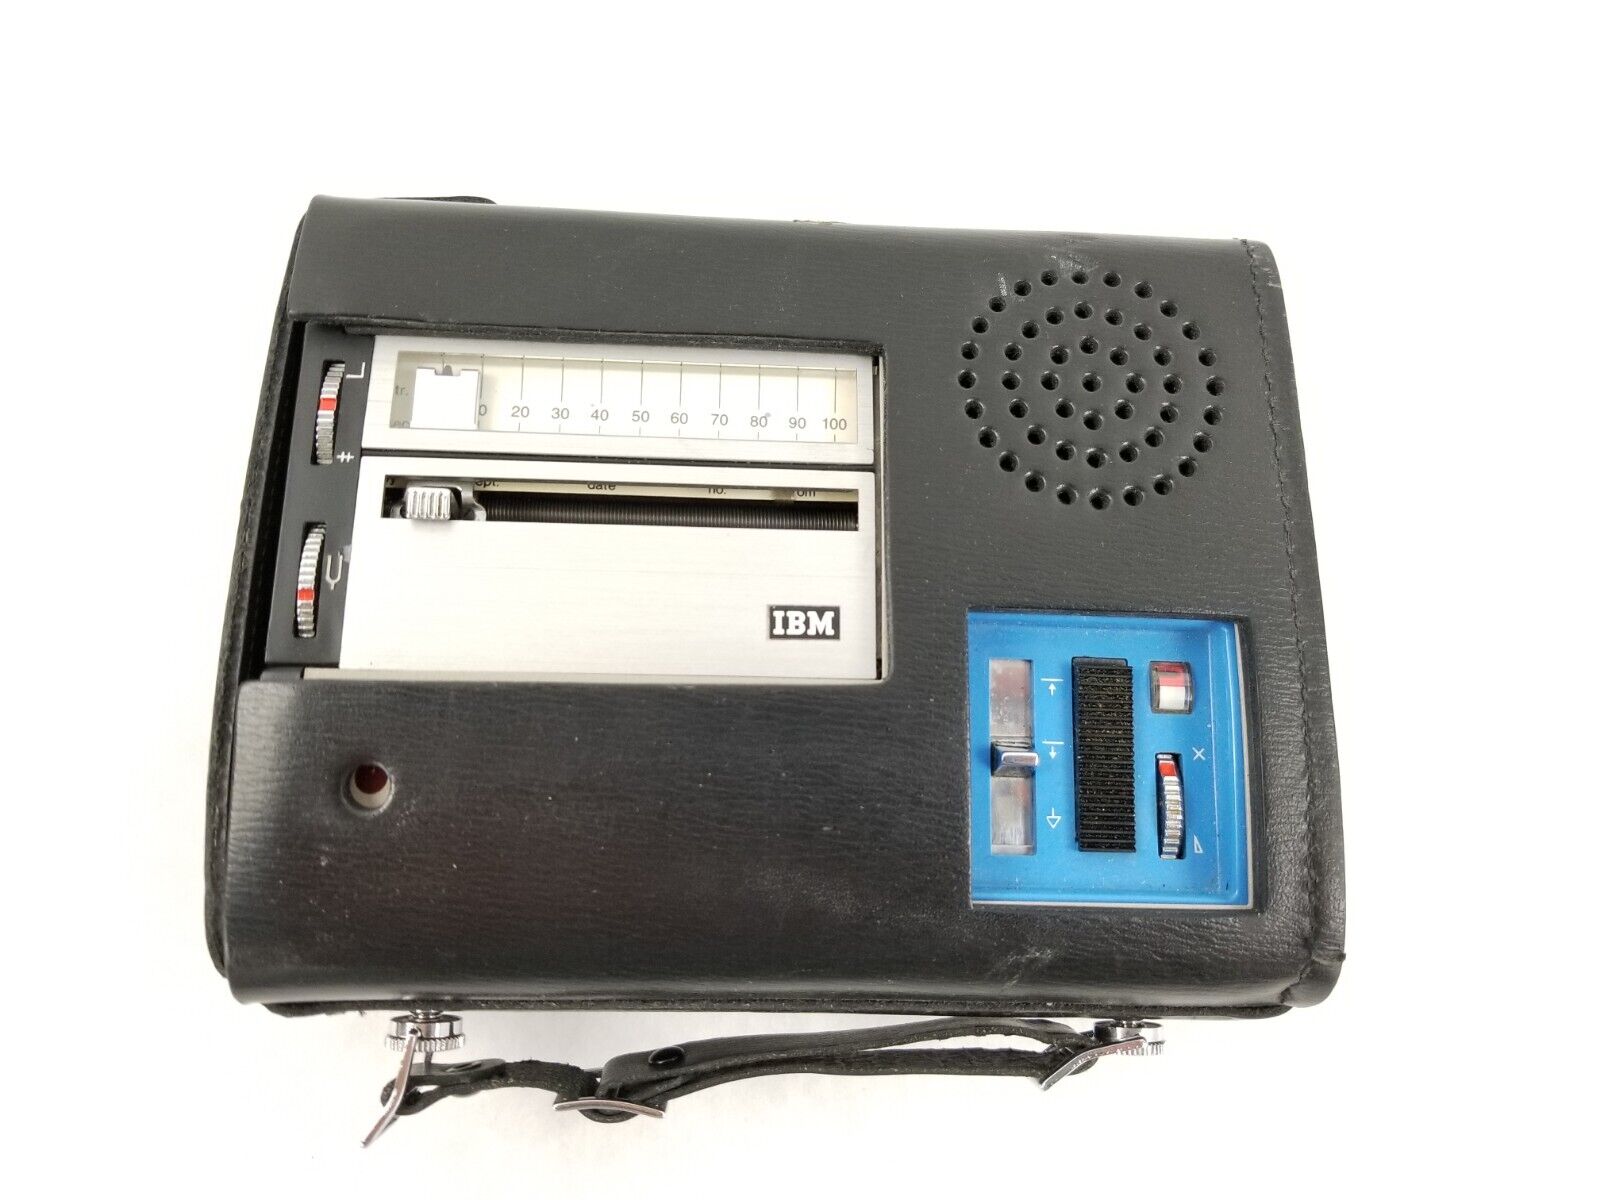 IBM Executary 224 Dictating Portable Machine Untested No Accessories.